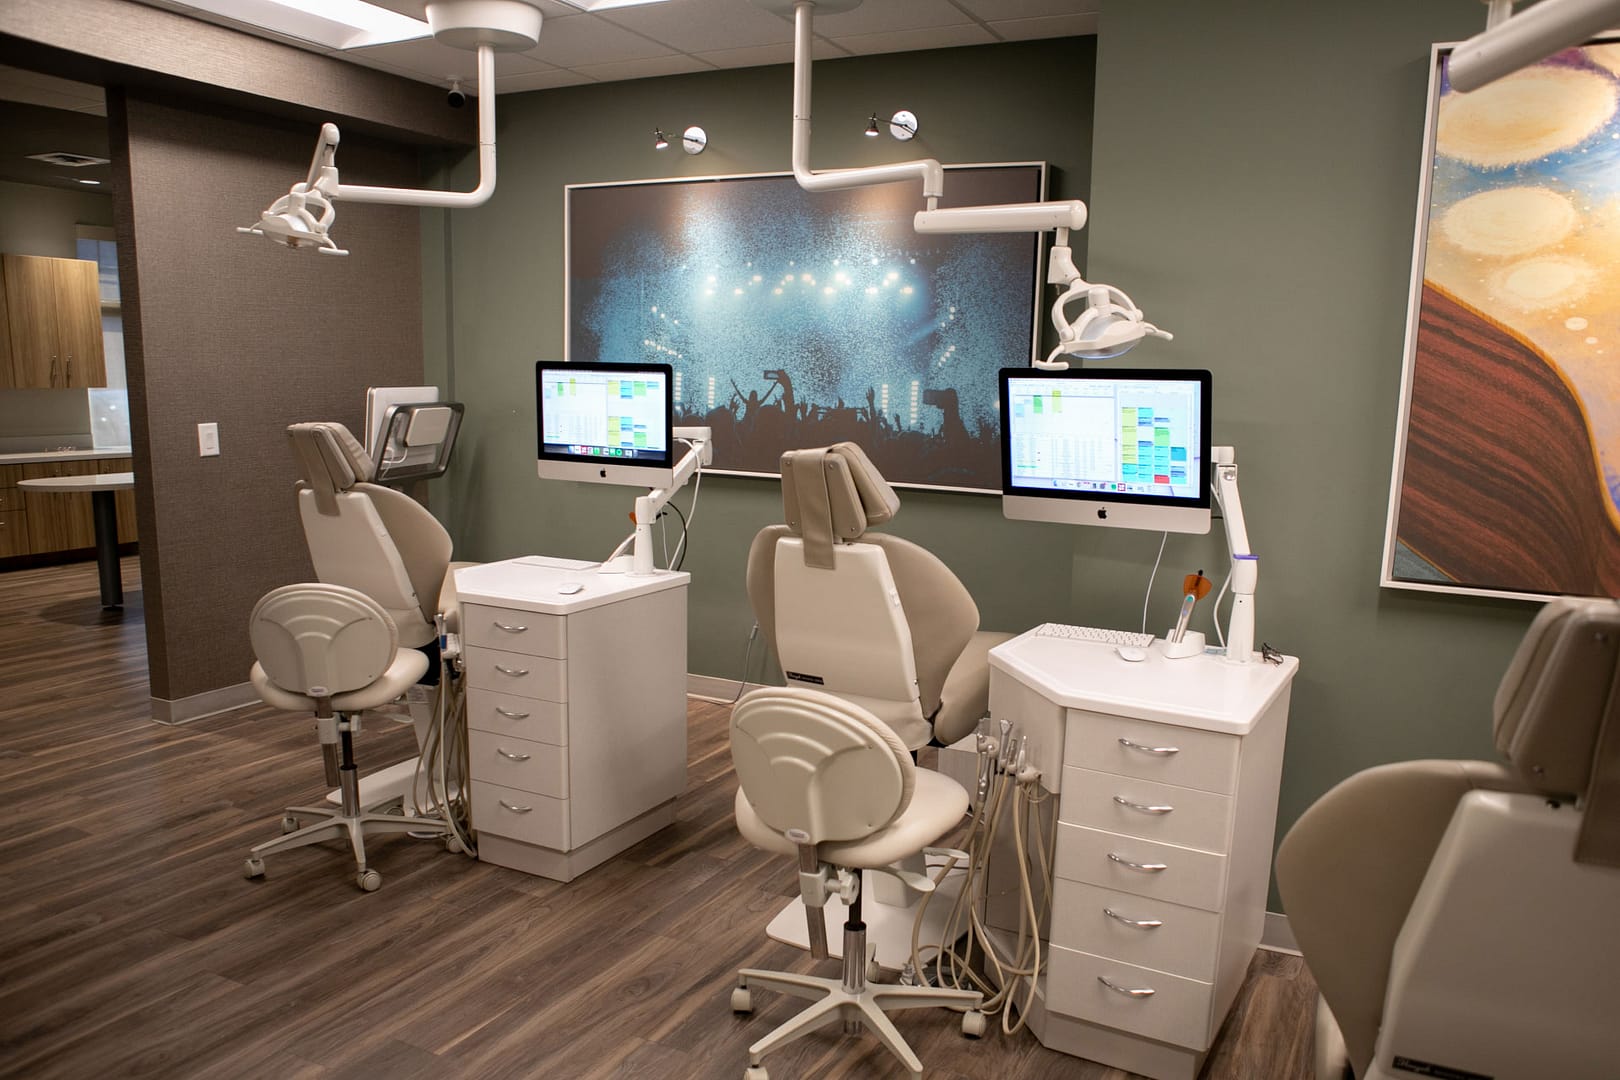 exam room with dental chairs and equipment and large artwork on walls